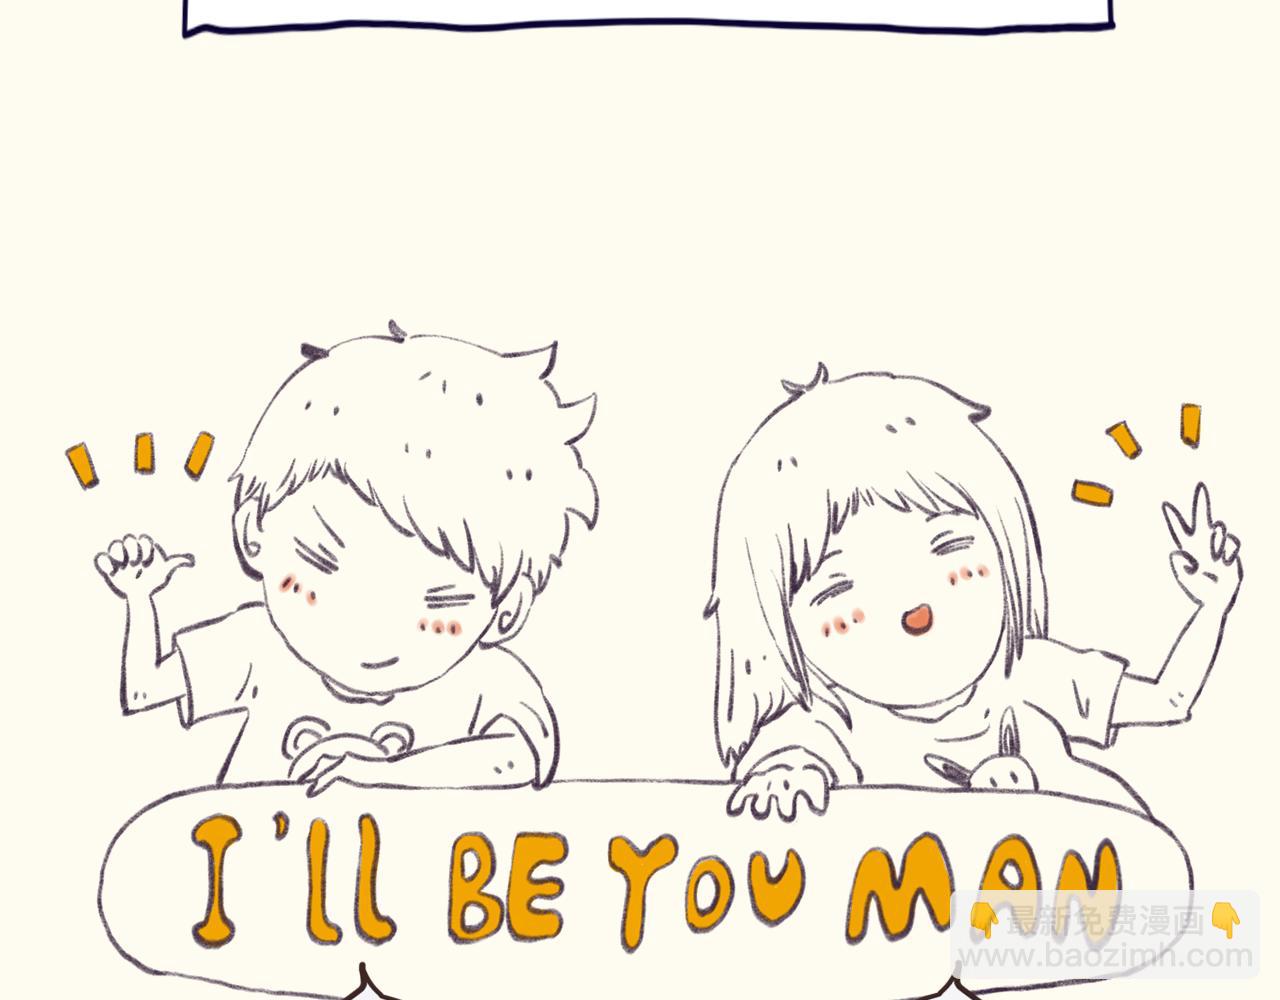 I WELL BE YOU MAN - 4·出门 - 5